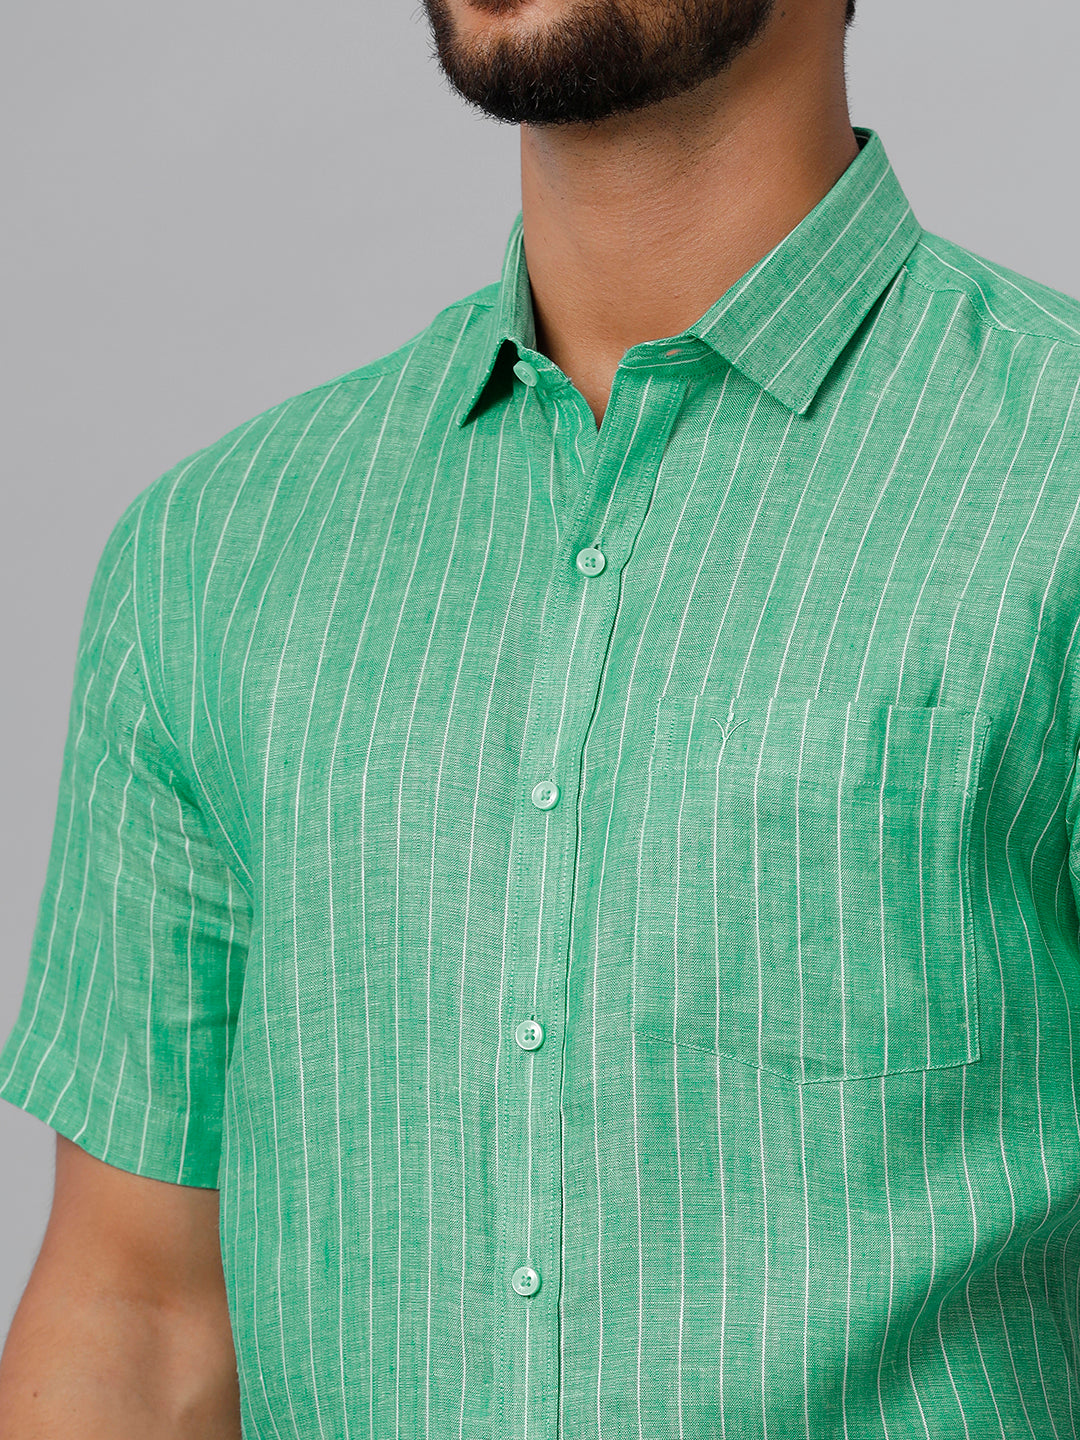 Mens Pure Linen Striped Half Sleeves Green Shirt LS12-Zoom view